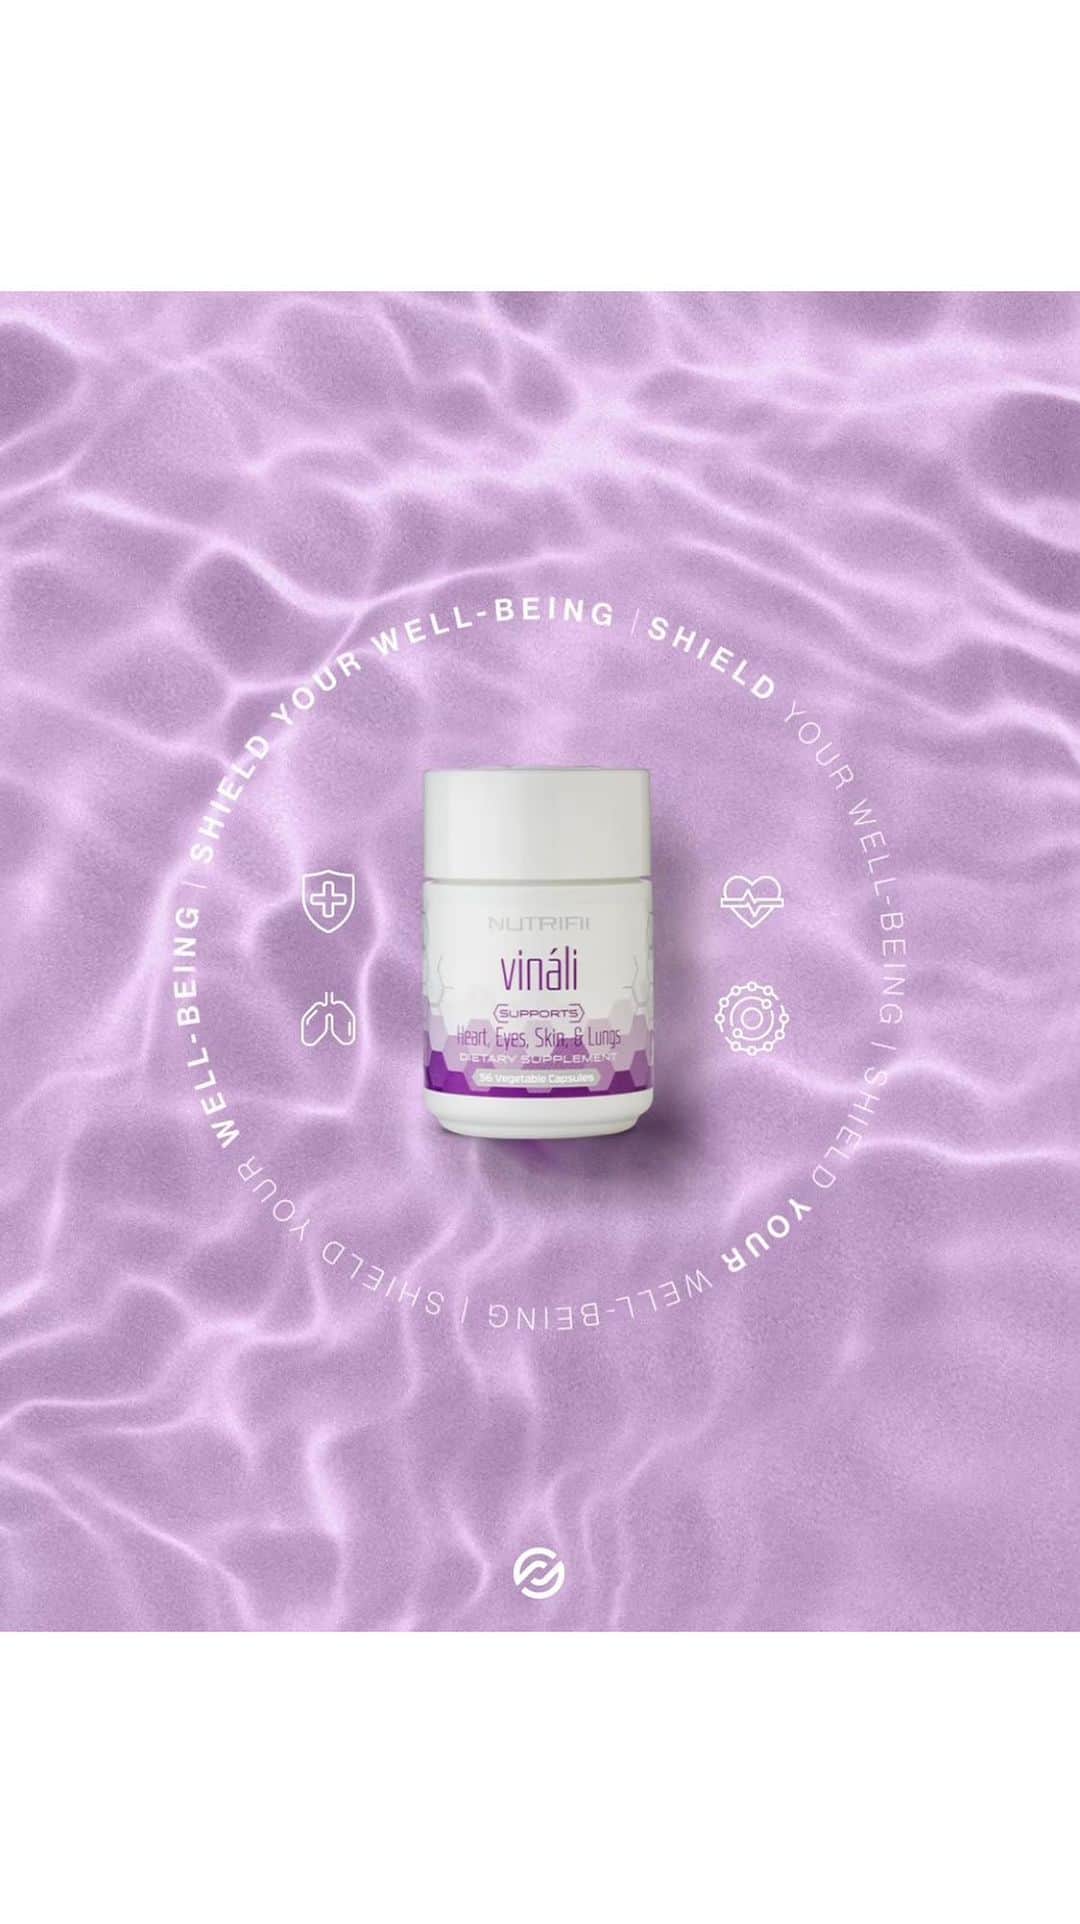 ARIIX Officialのインスタグラム：「What do we mean when we say shield your well-being?  ⁠ 🍇 Grape seed extract is one of the most potent antioxidants on Earth!  When used in combination with Vitamin C and Acerola Cherry, you get ✨free-radical protection✨ and immune system support! Vinali’s powerful properties also promote cell health and skin elasticity. 🙌 ⁠ ⁠ #Vinali #PartnerCo ⁠」